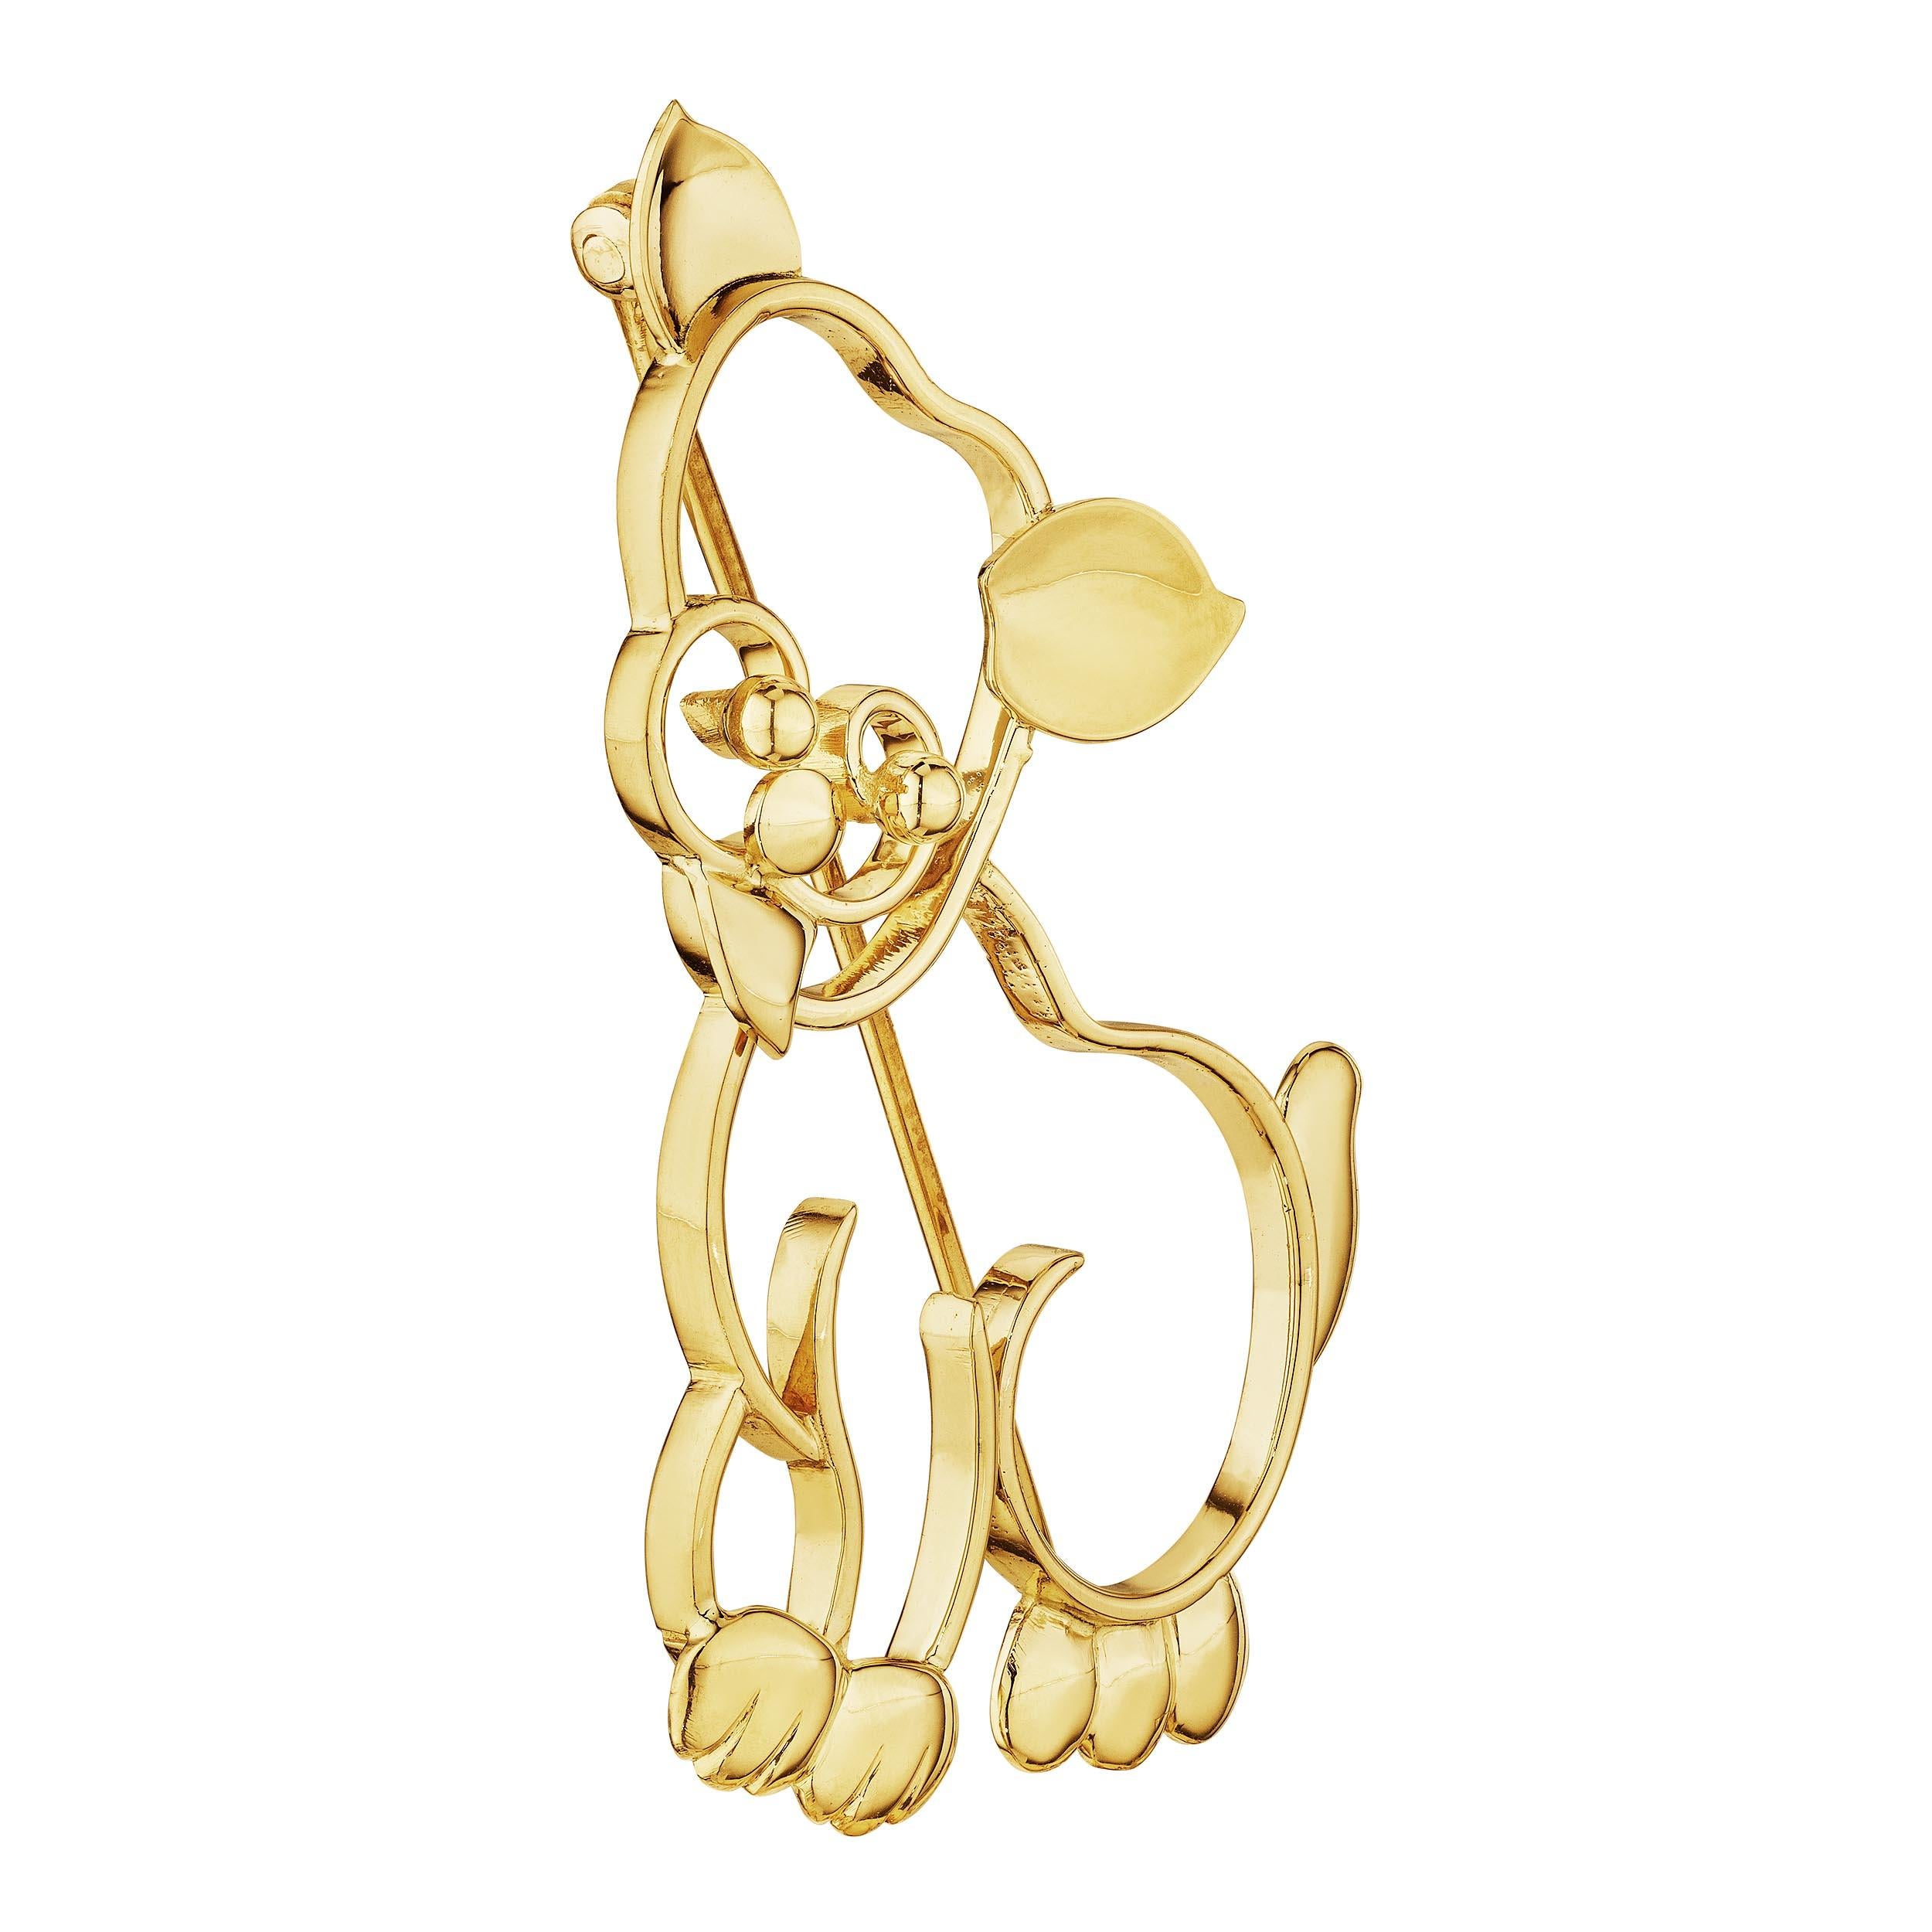 A dog is a man's best friend, and this Tiffany & Co. mid-century 14 karat yellow gold adorable dog brooch will always be your coveted companion..  Signed Tiffany.  Circa 1950-55.  1 3/4